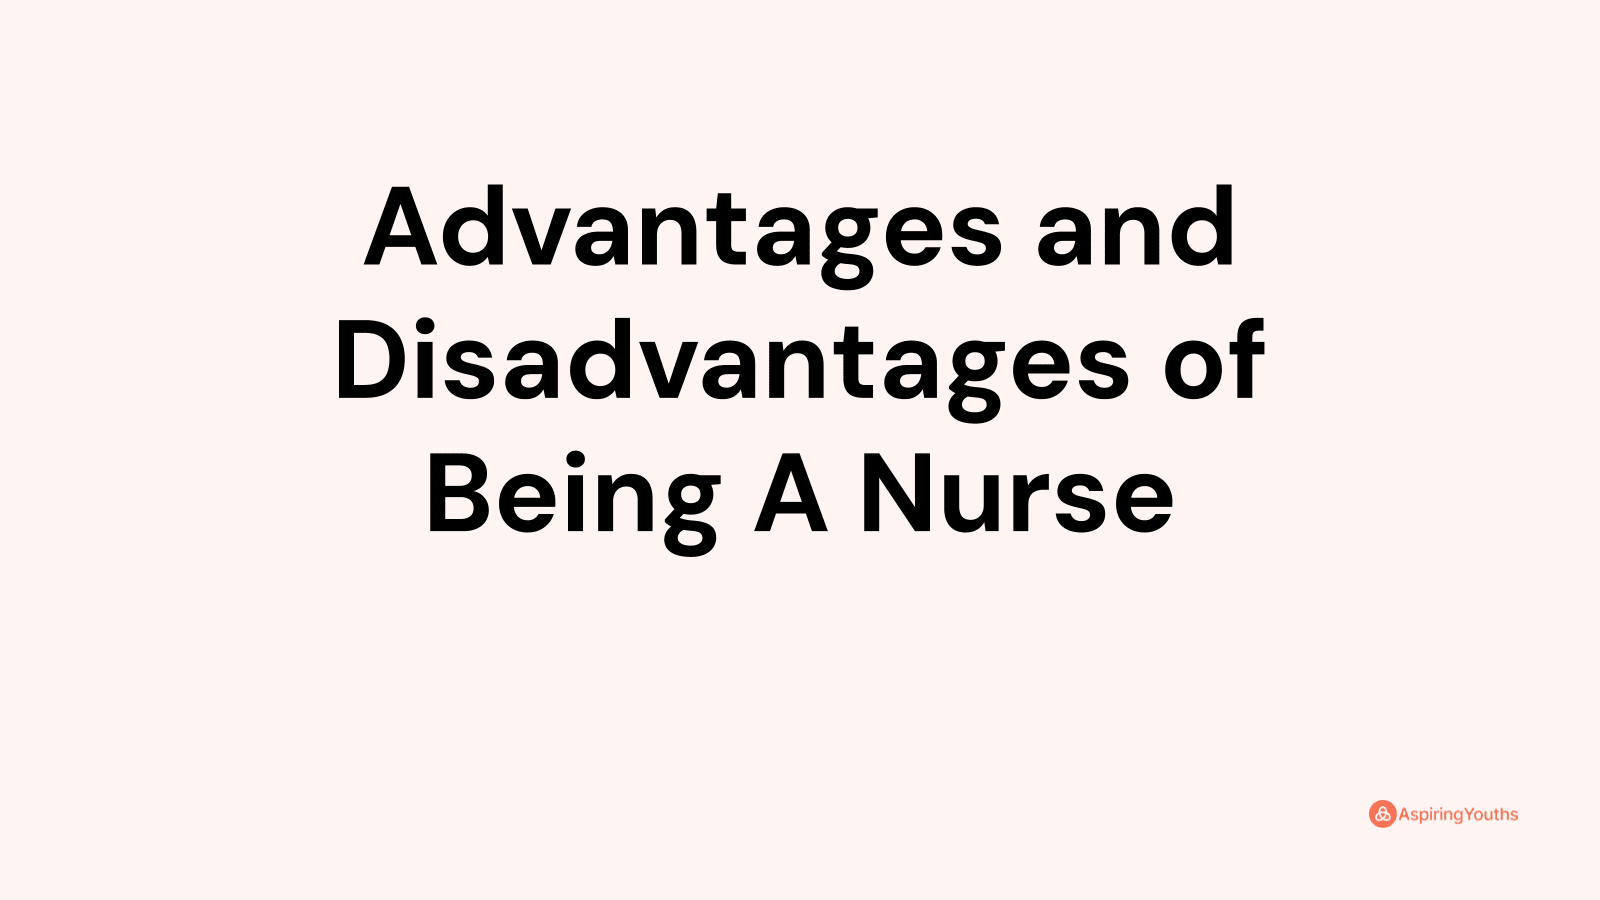 Advantages and disadvantages of Being A Nurse